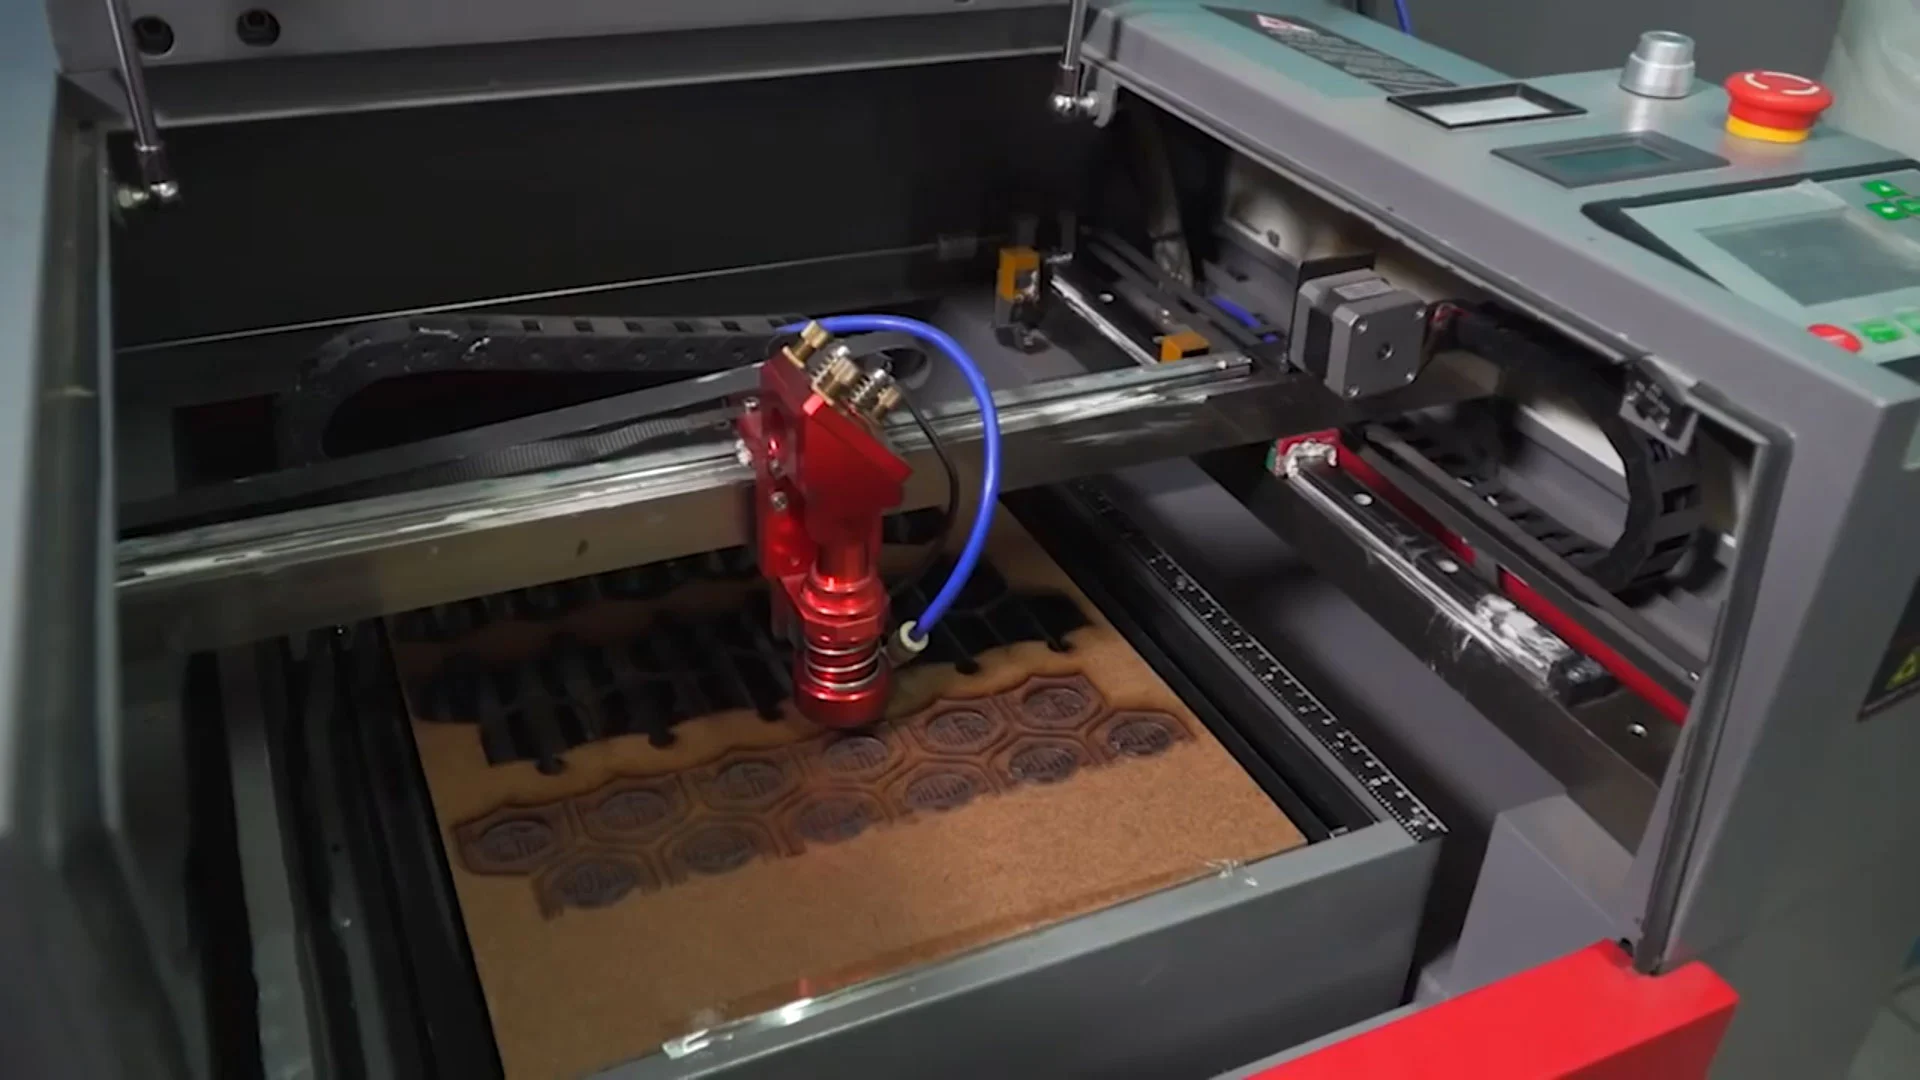 3D Printing and Laser Engraving